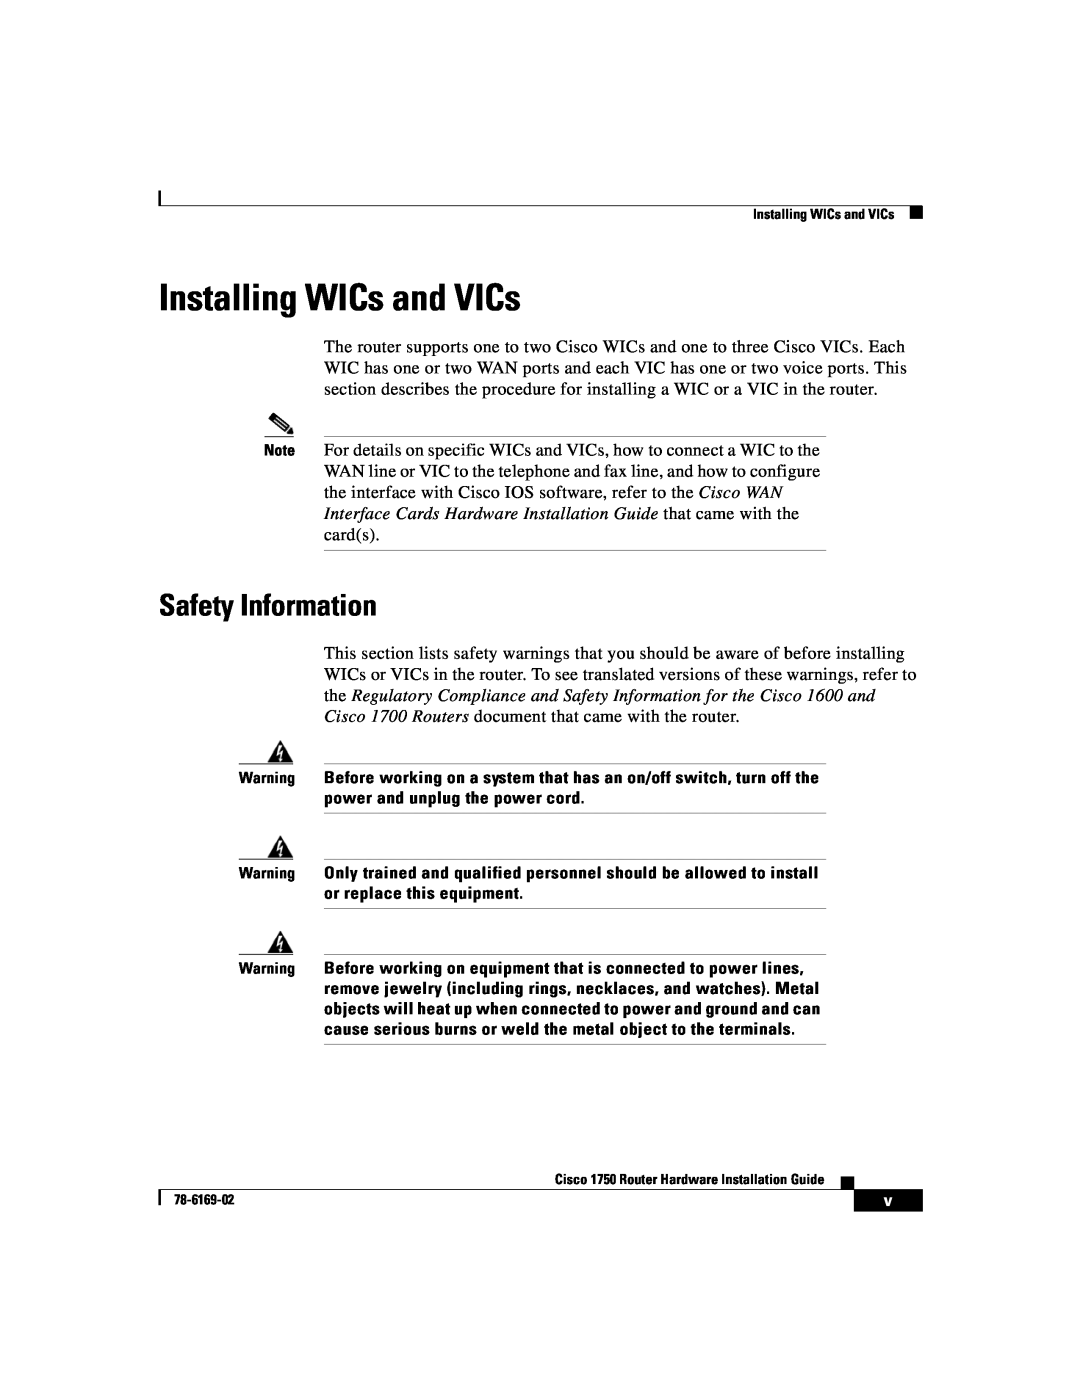 Cisco Systems CISCO1750 manual Installing WICs and VICs, Safety Information 